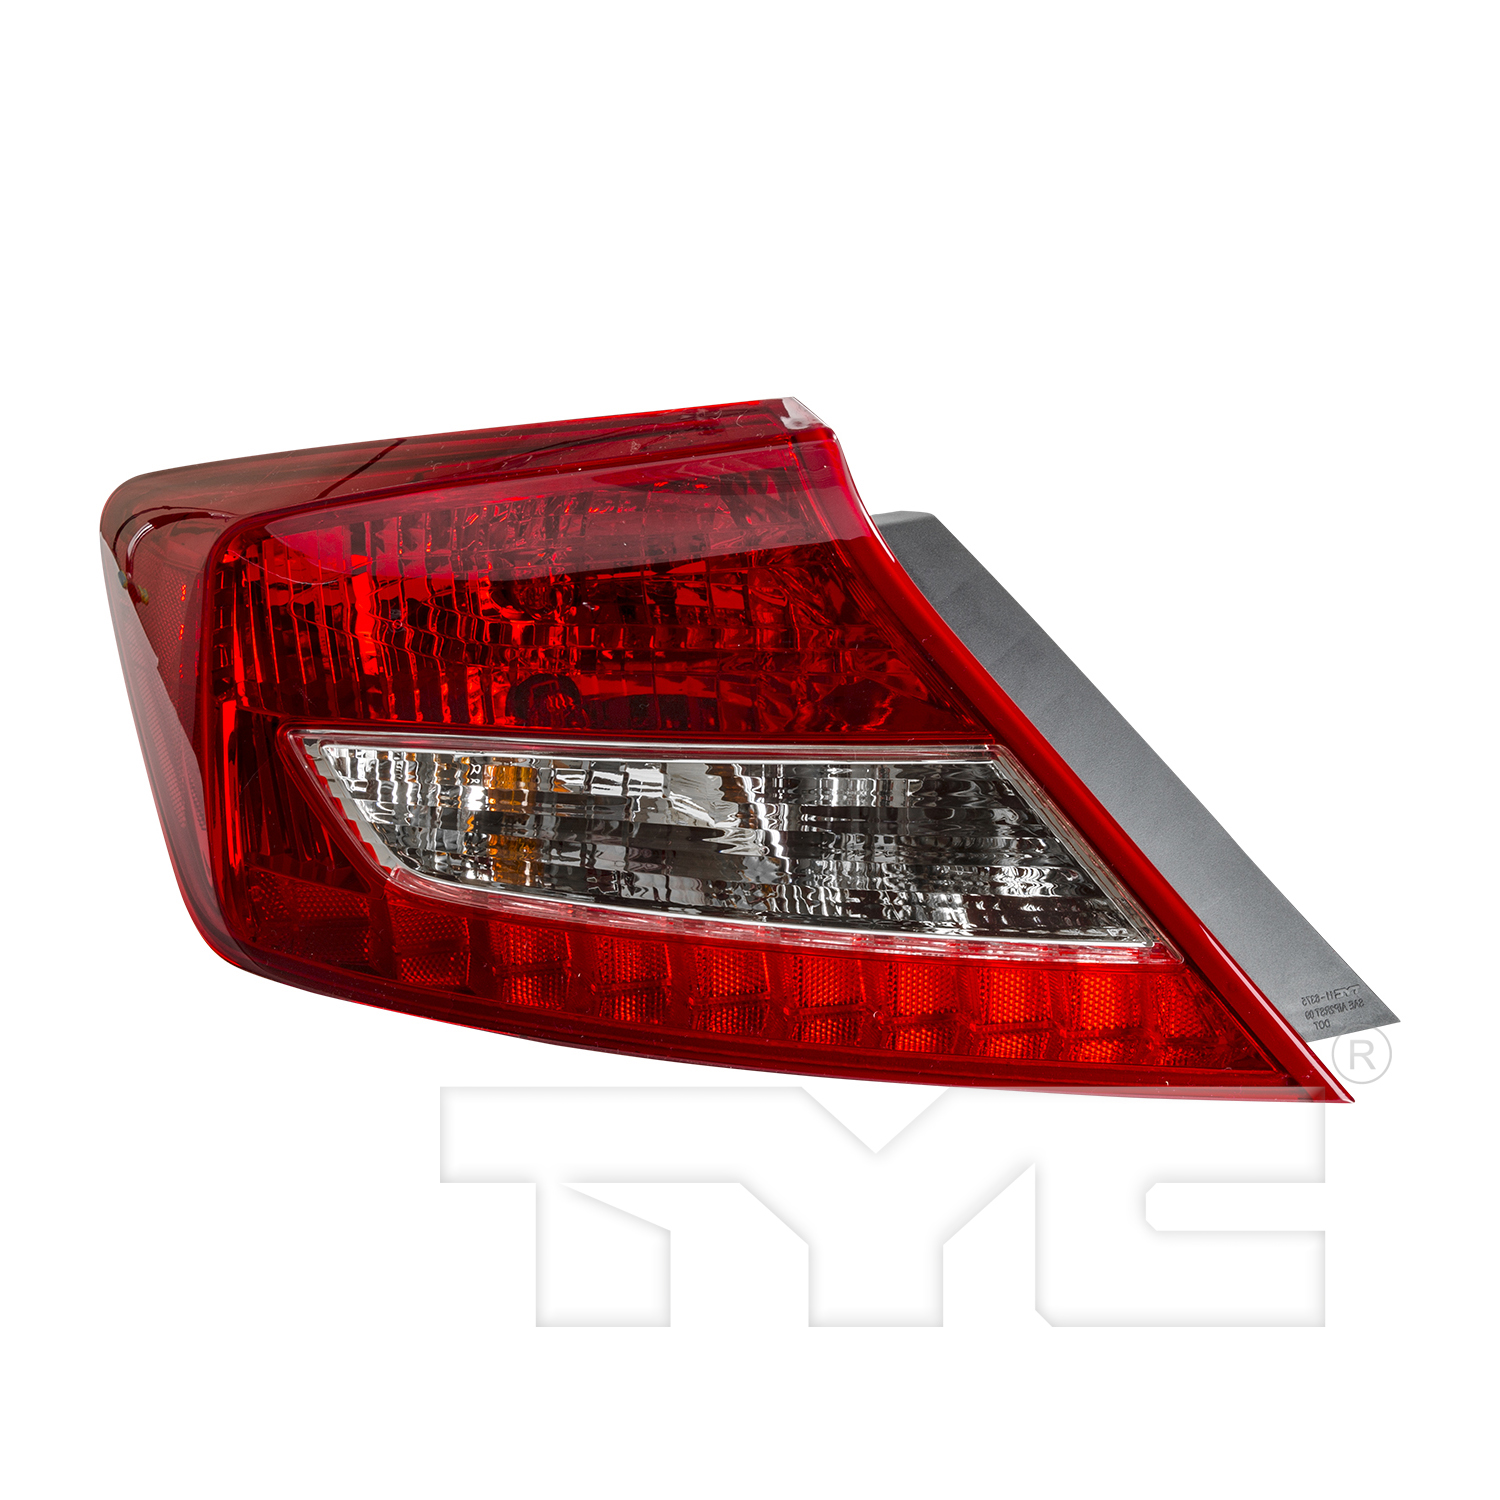 Aftermarket TAILLIGHTS for HONDA - CIVIC, CIVIC,12-13,LT Taillamp assy